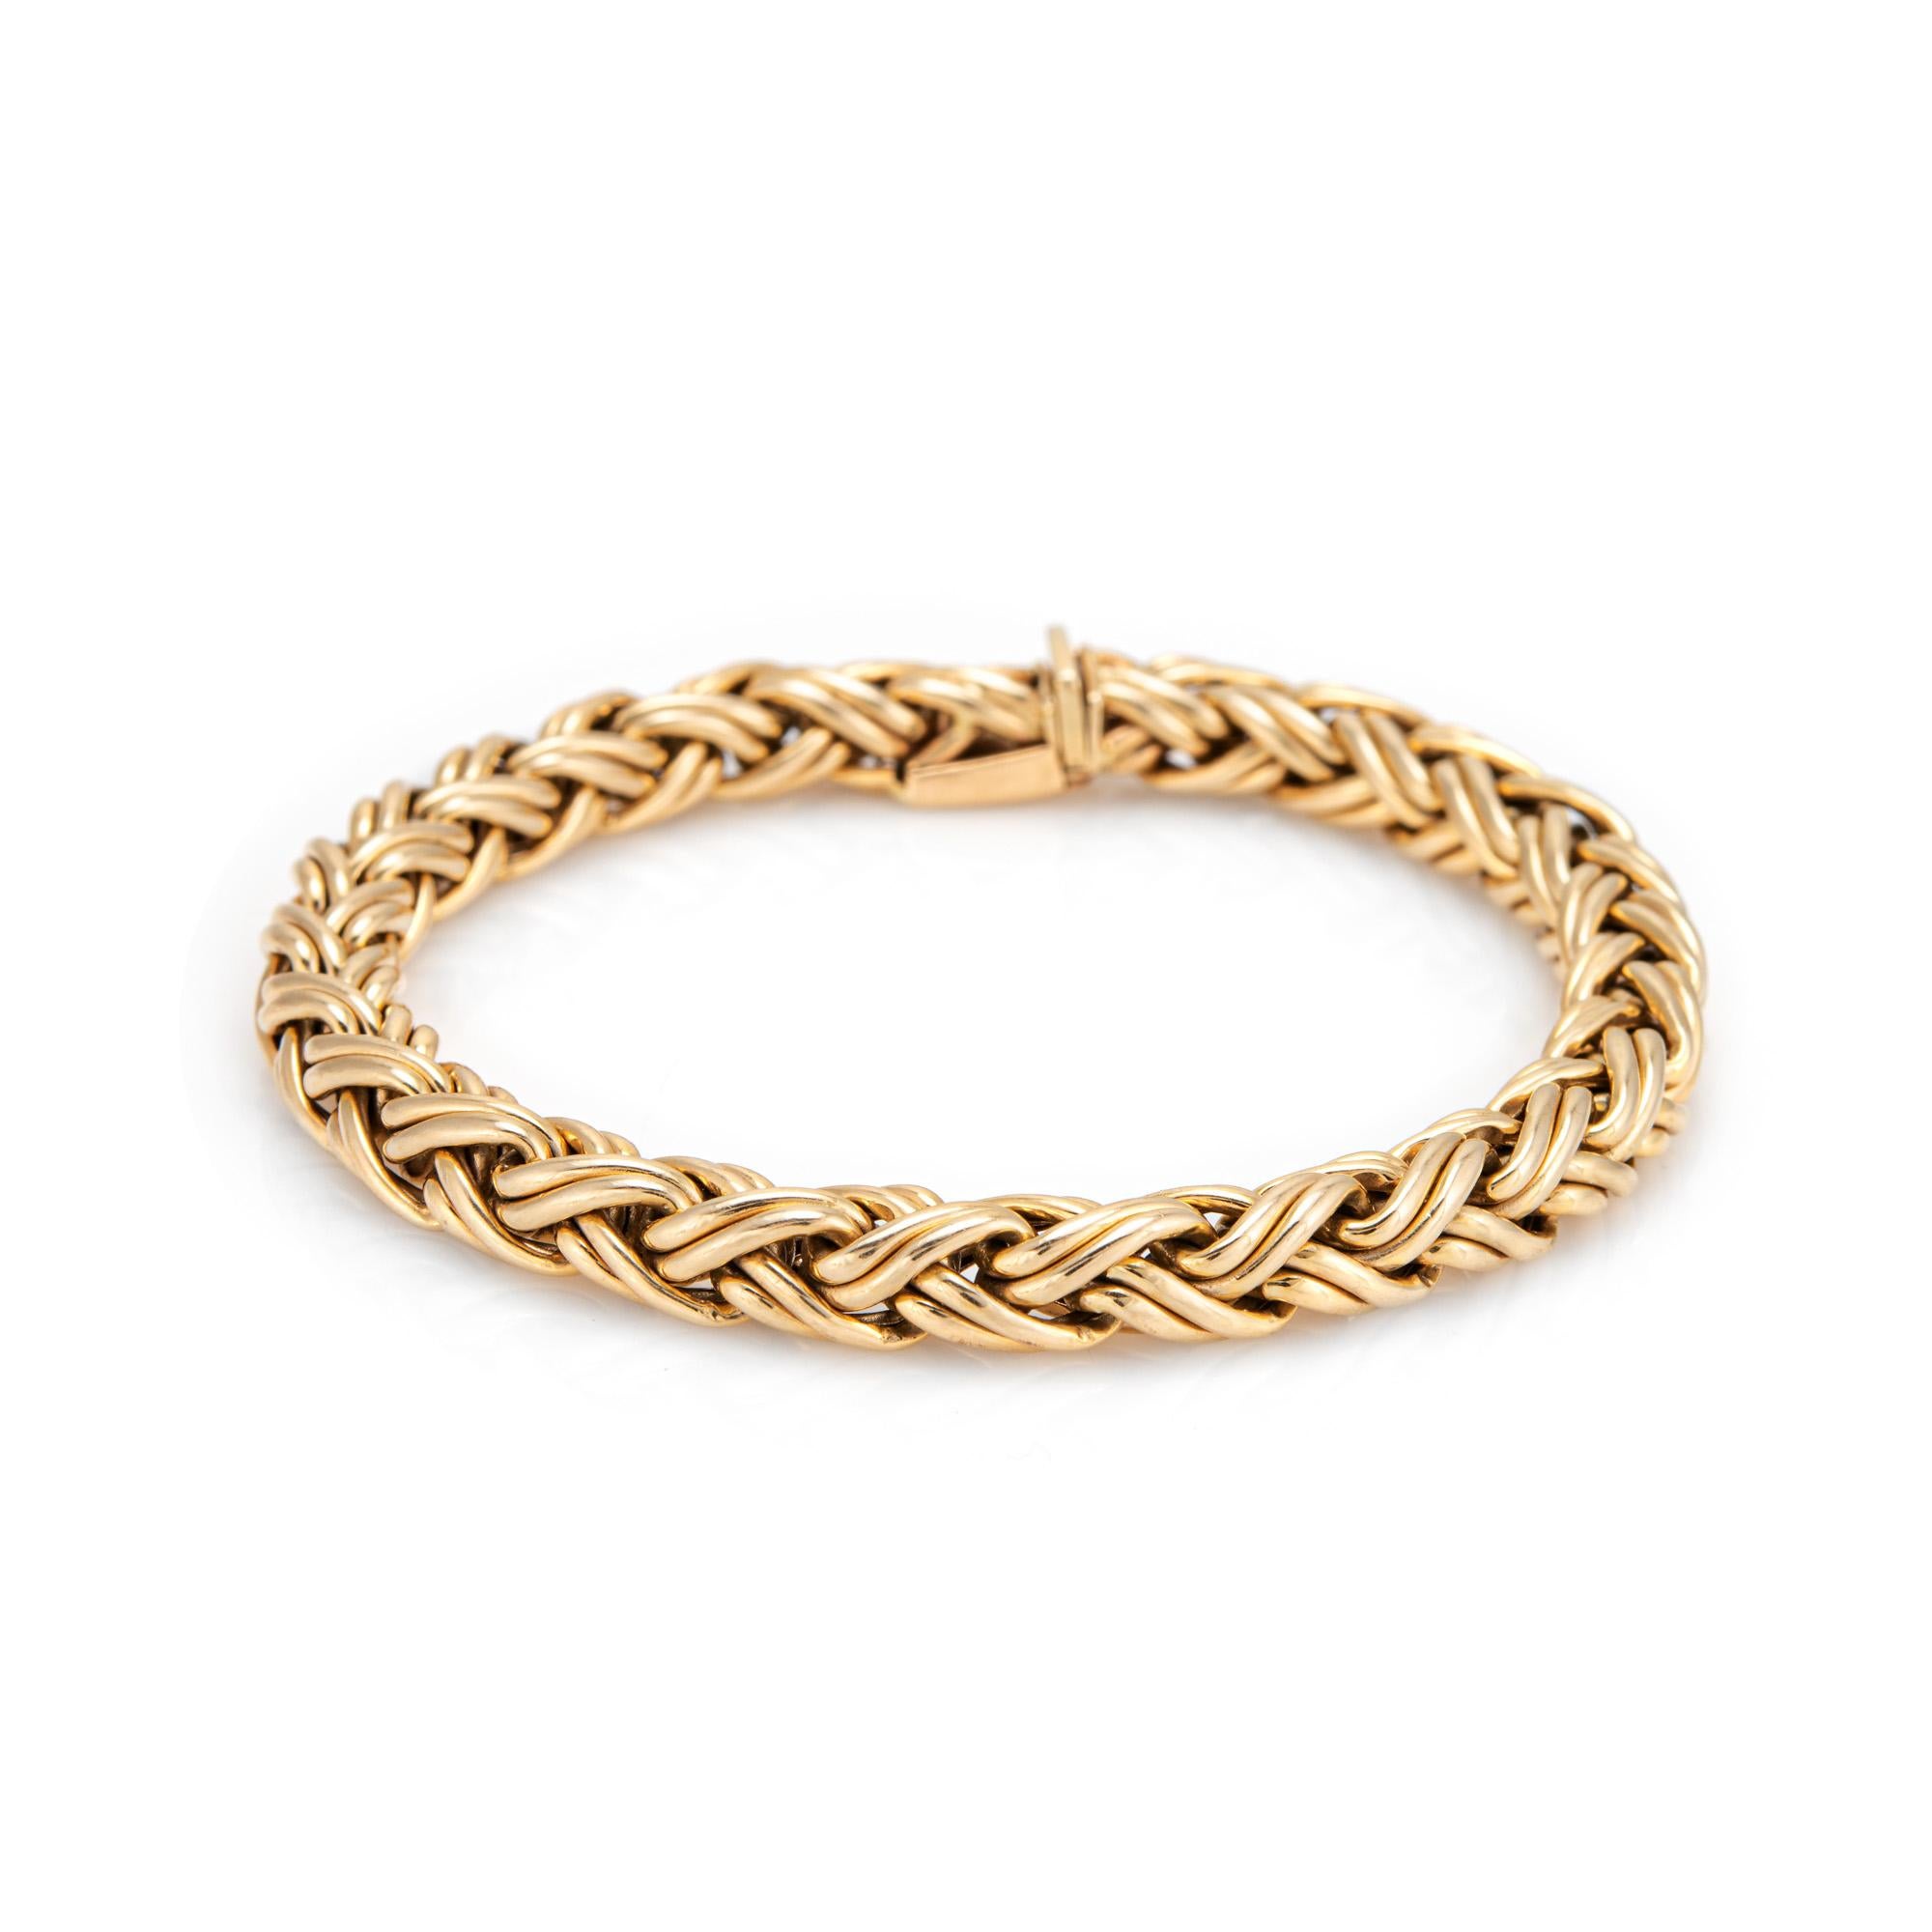 Stylish and finely detailed pre-owned Tiffany & Co choker bracelet, crafted in 14k yellow.  

The bracelet features an interwoven fancy link weave pattern. Measuring 7 1/2 inches the bracelet is great worn alone or layered. The bracelet is a retired